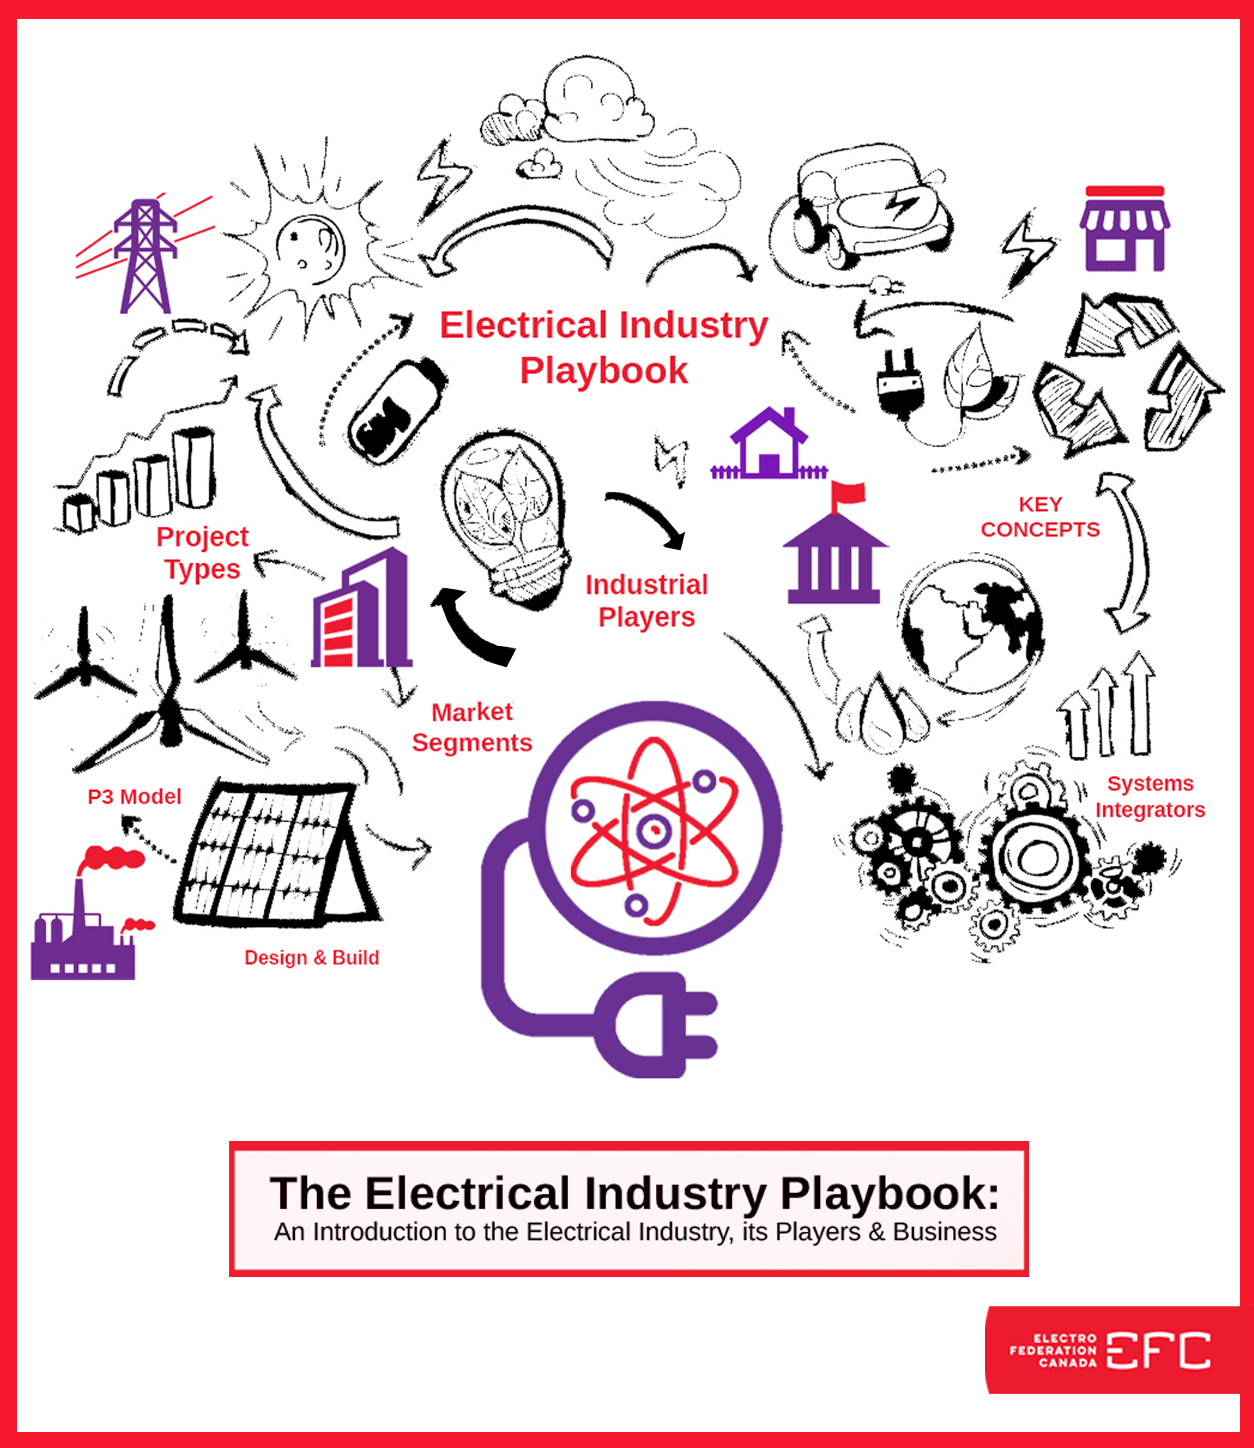 Electrical Industry Playbook